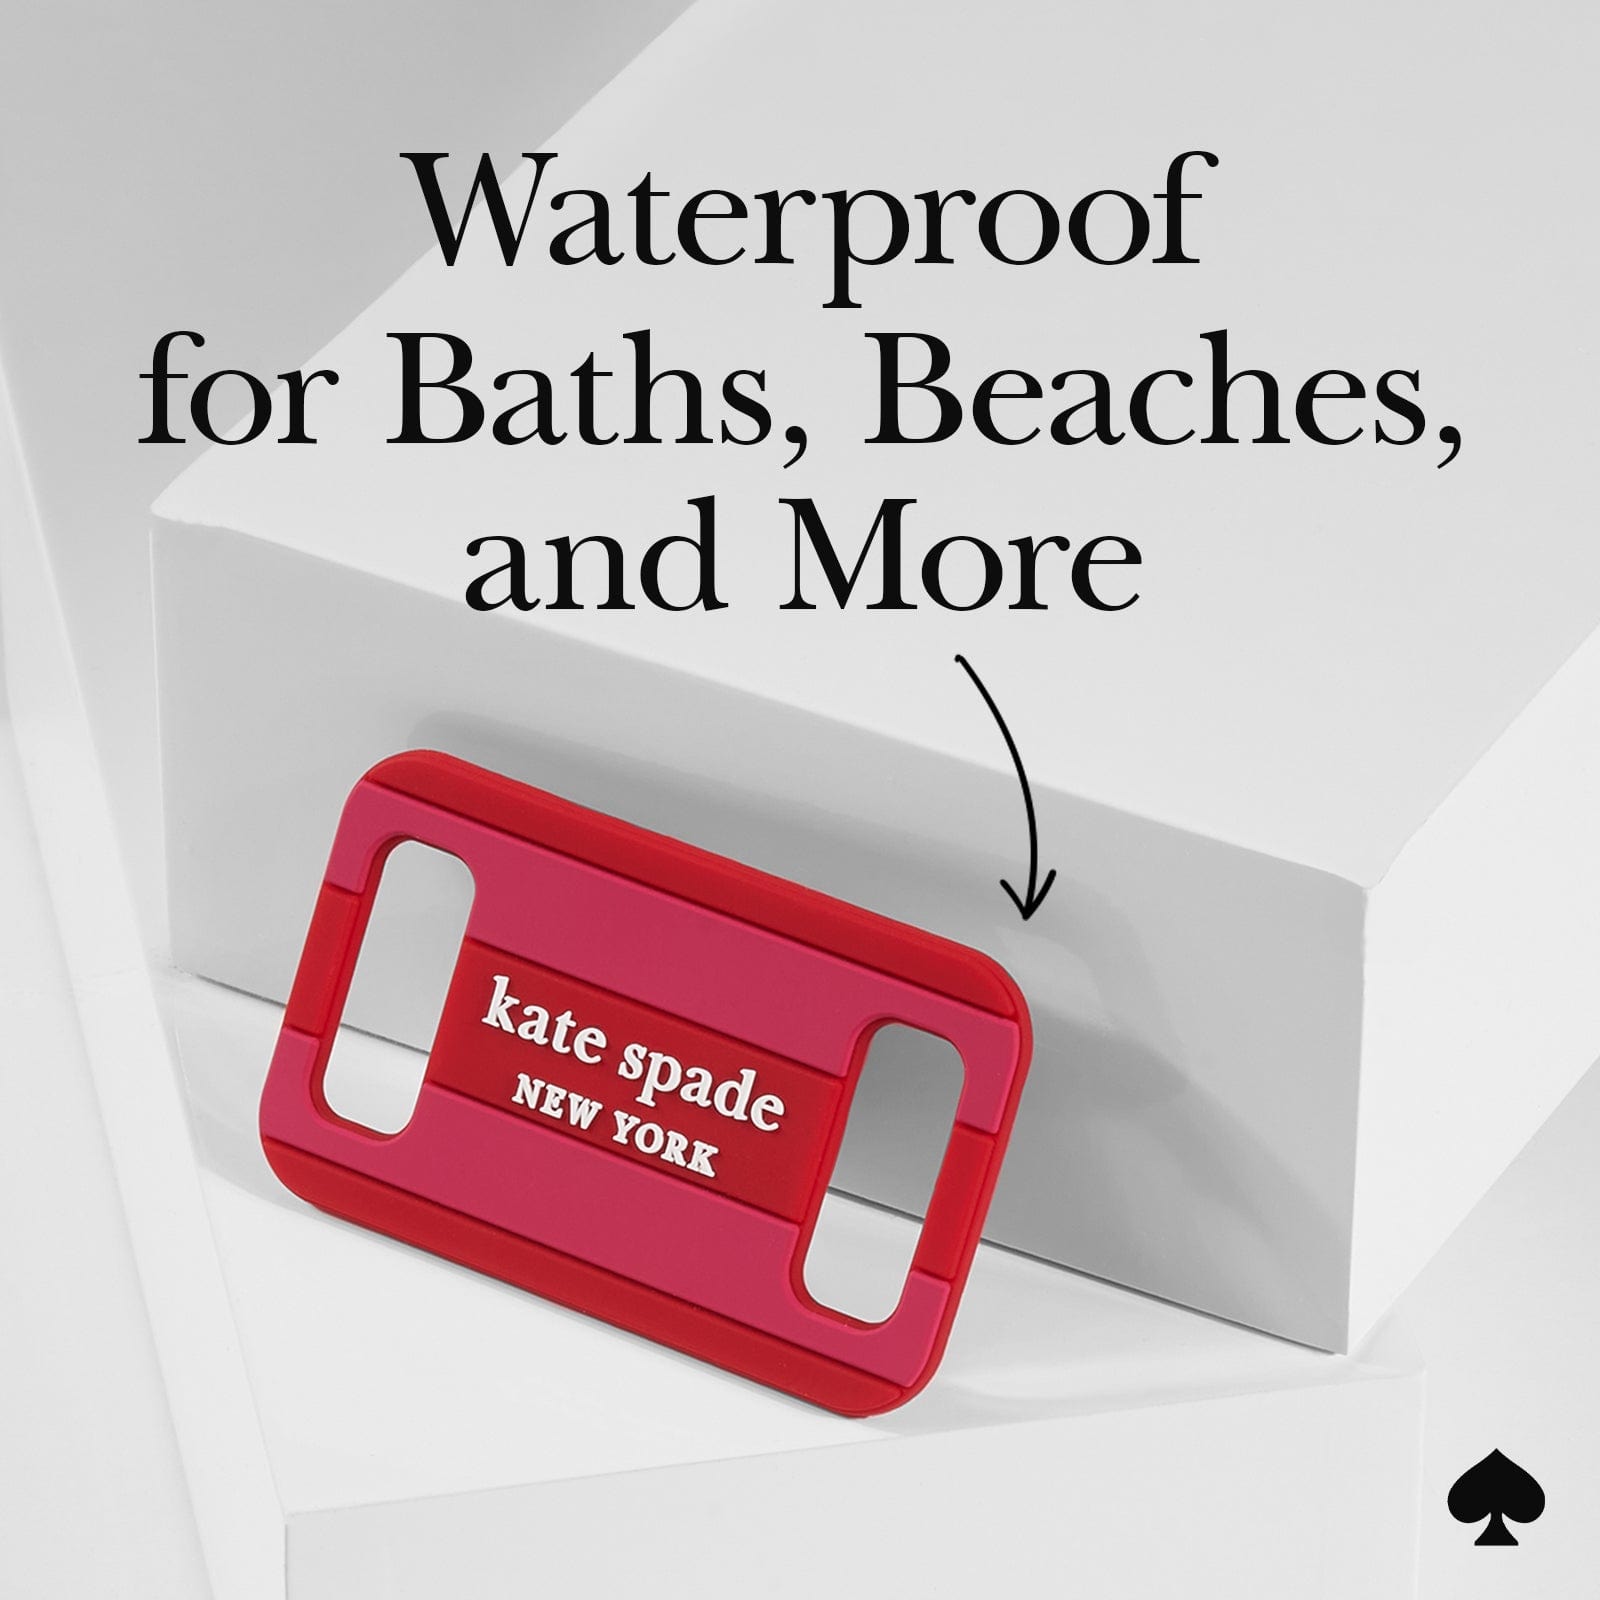 WATERPROF FOR BATHS, BEACHES AND MORE